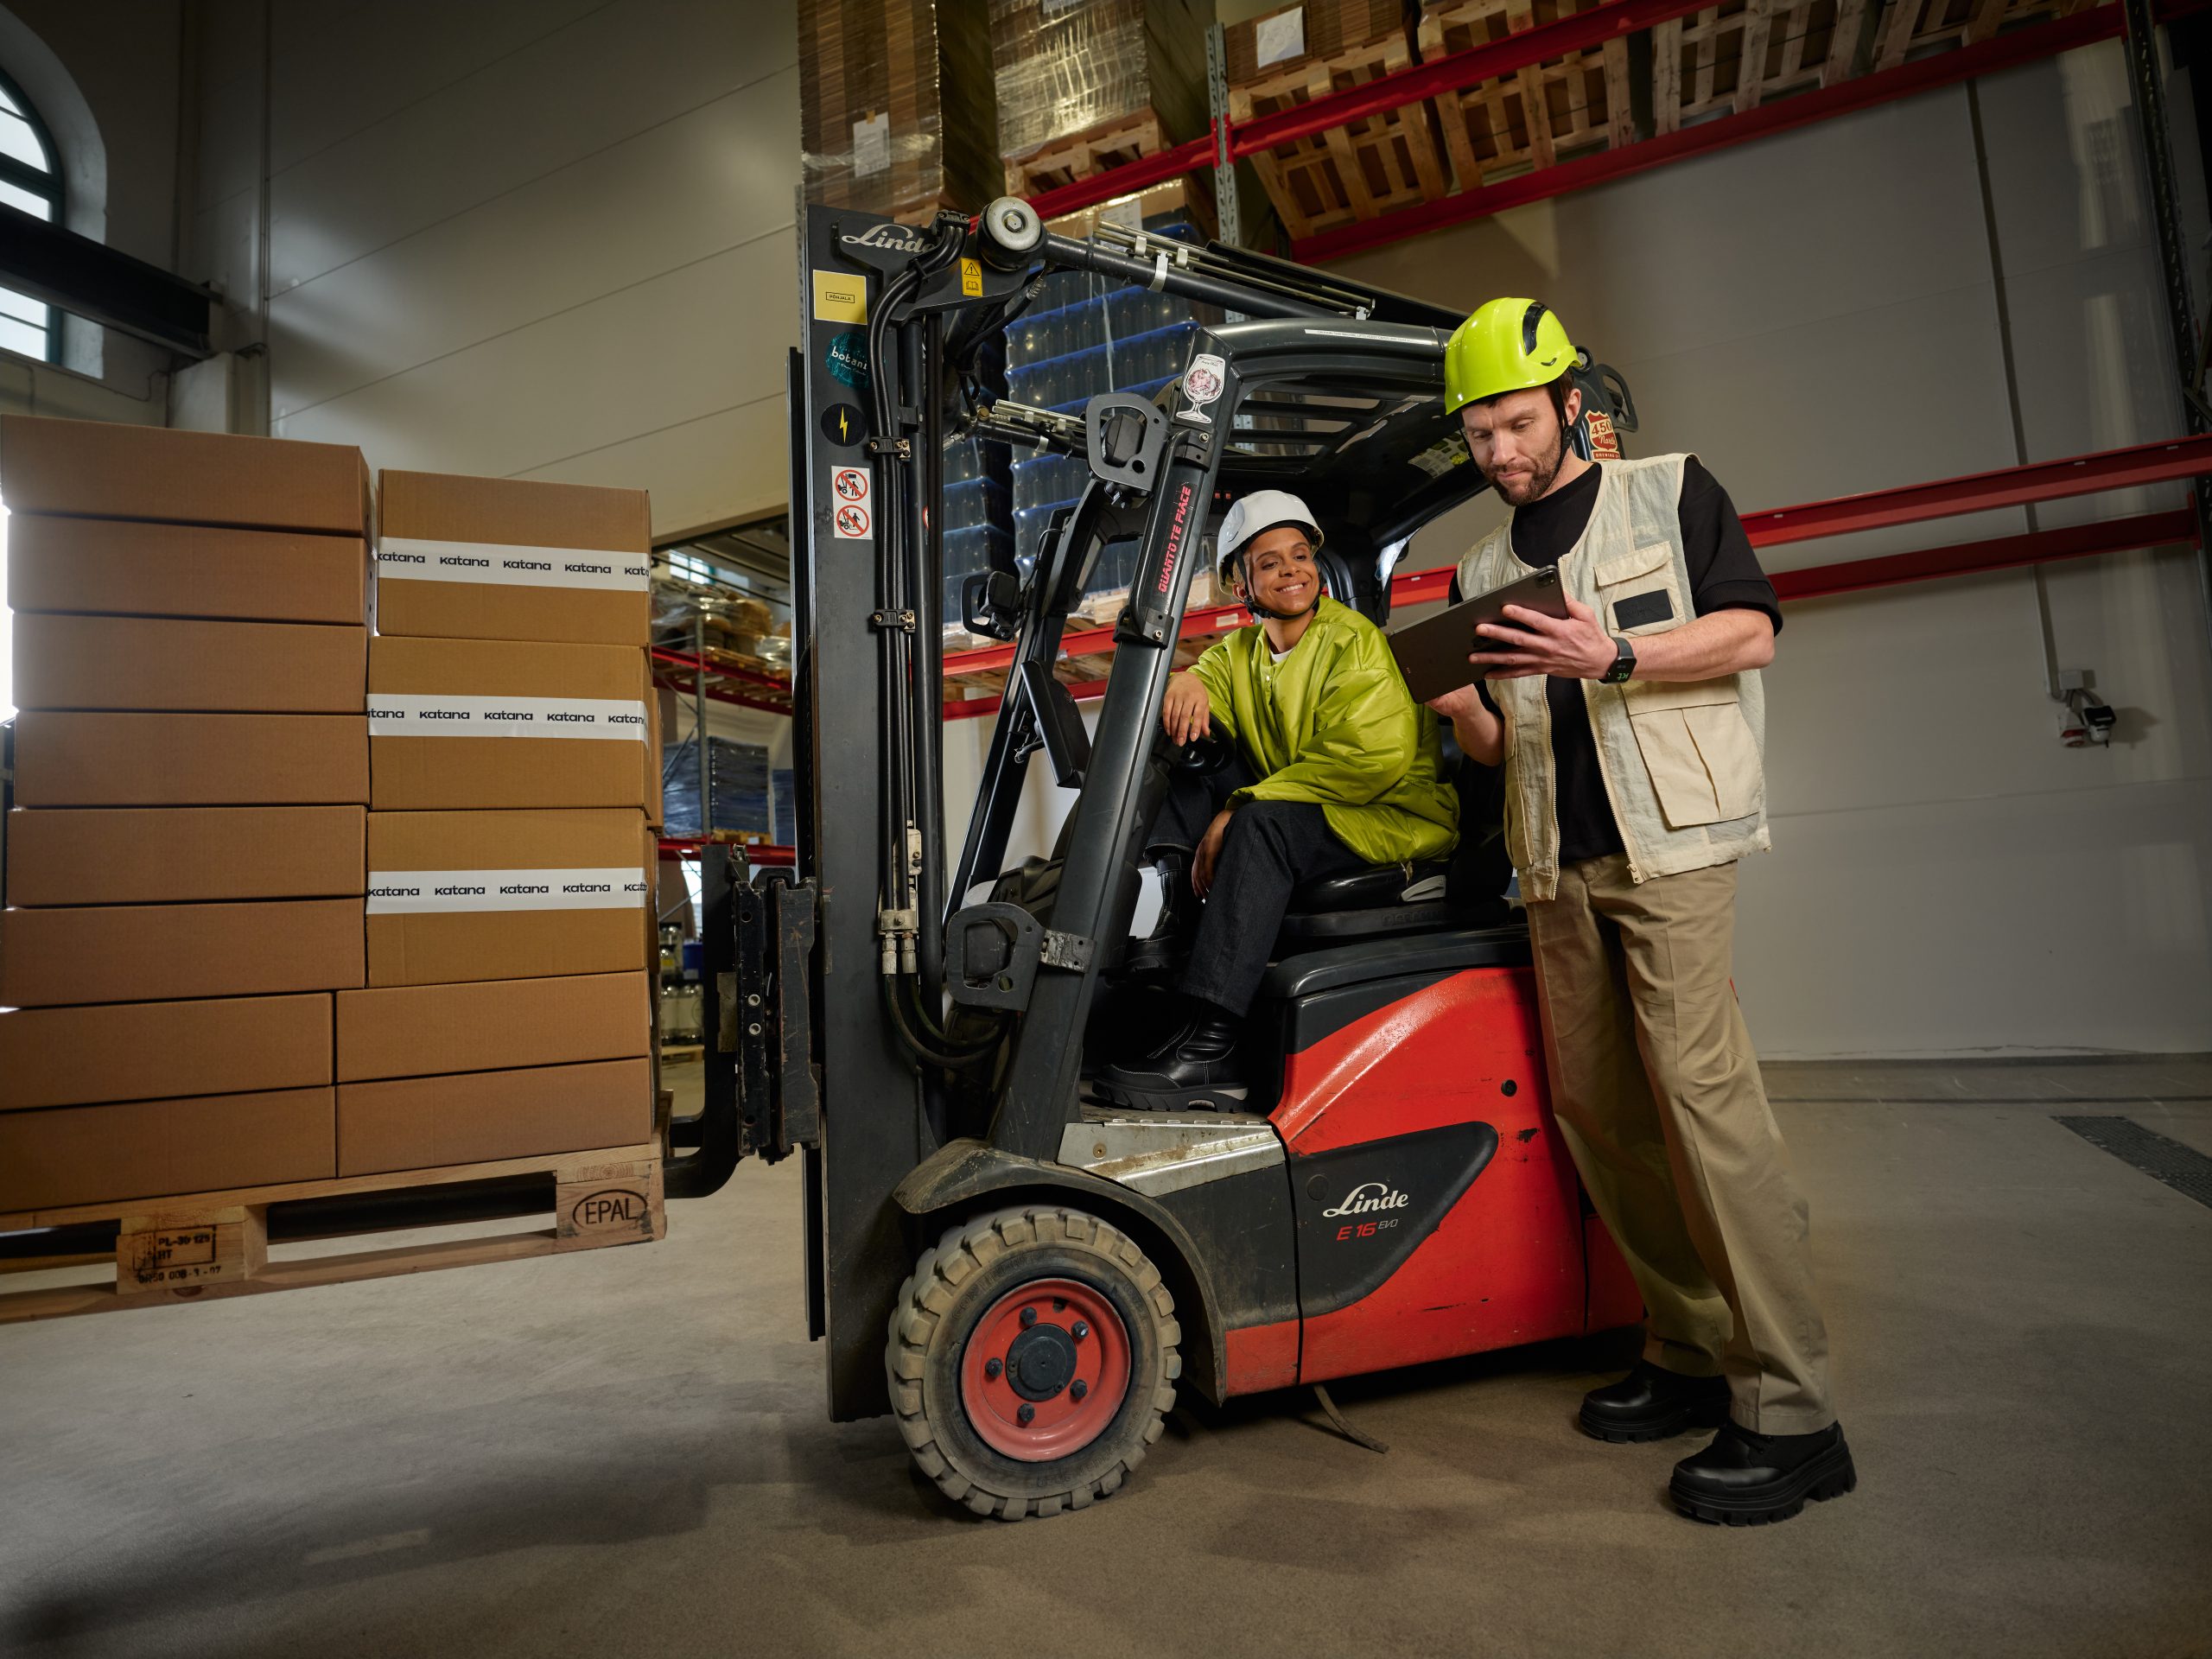 A worker sitting in a forklift talking to another worker while looking at their inventory management software on an iPad